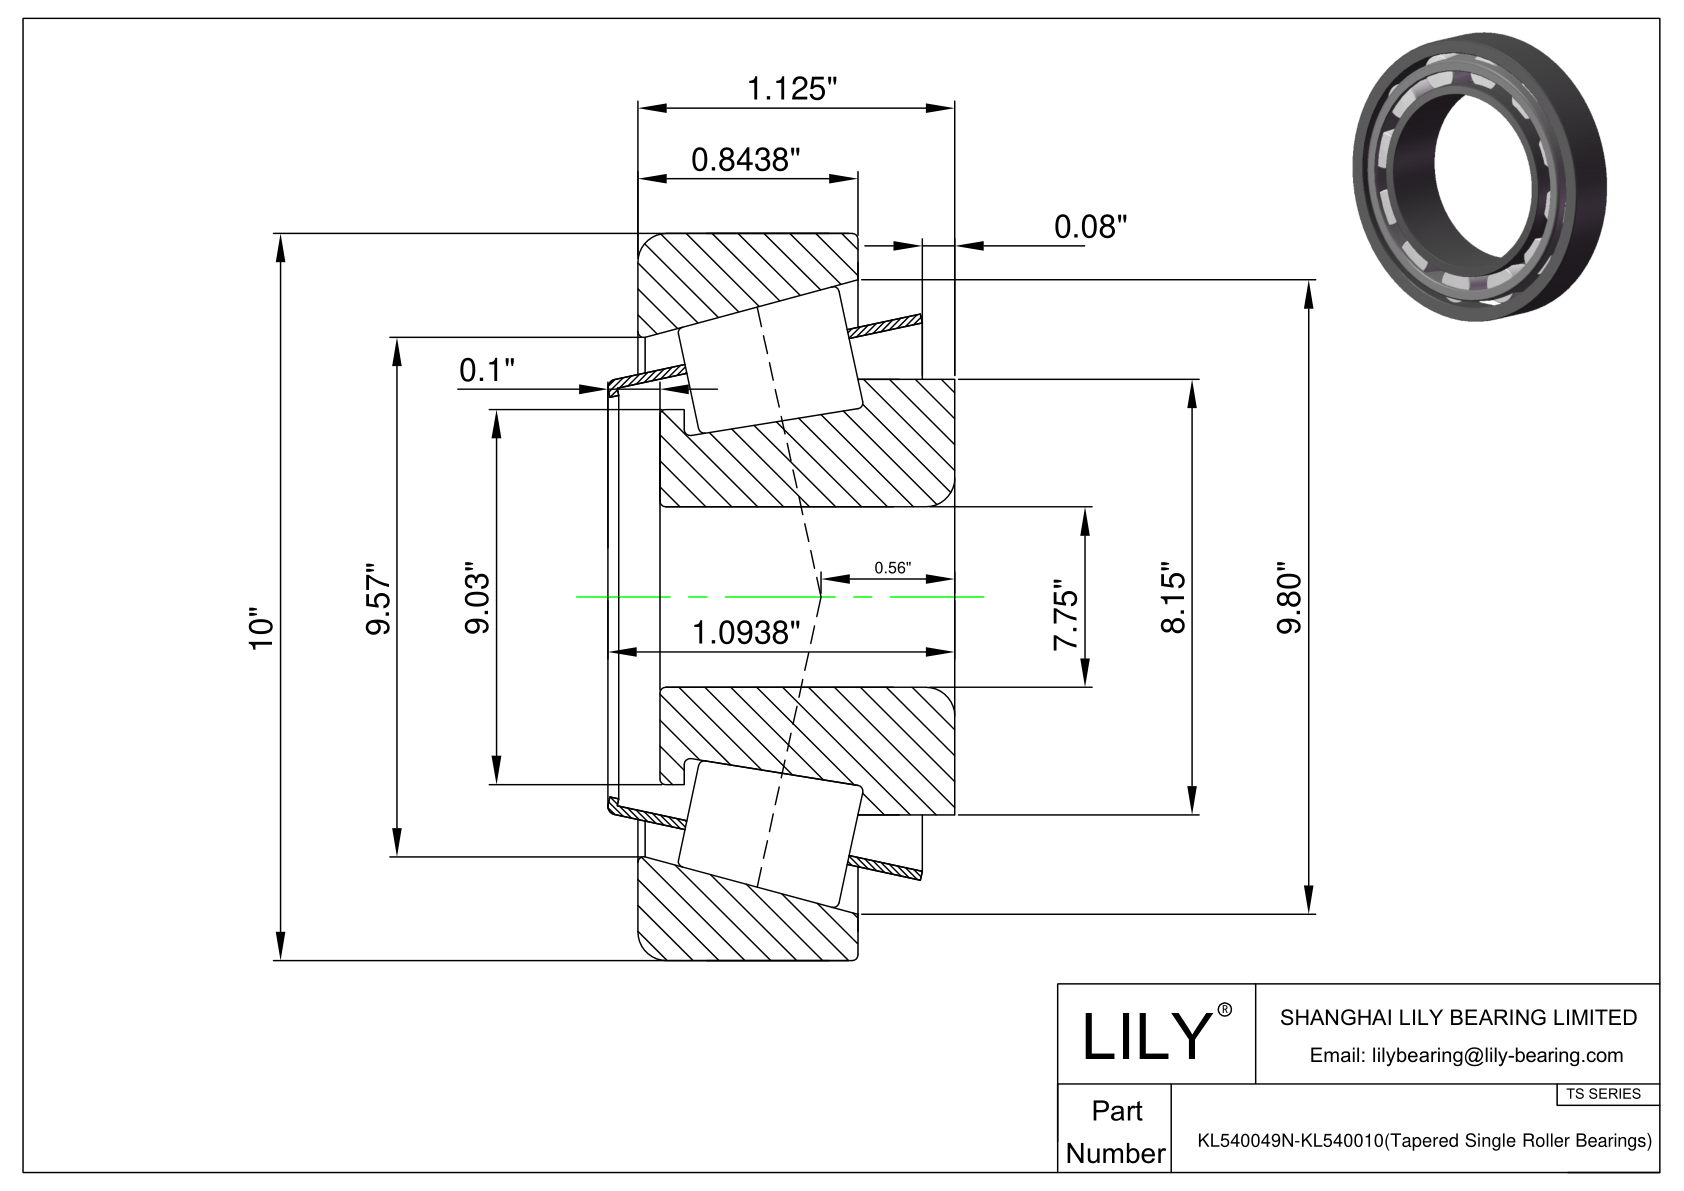 KL540049N-KL540010 TS (Tapered Single Roller Bearings) (Imperial) cad drawing